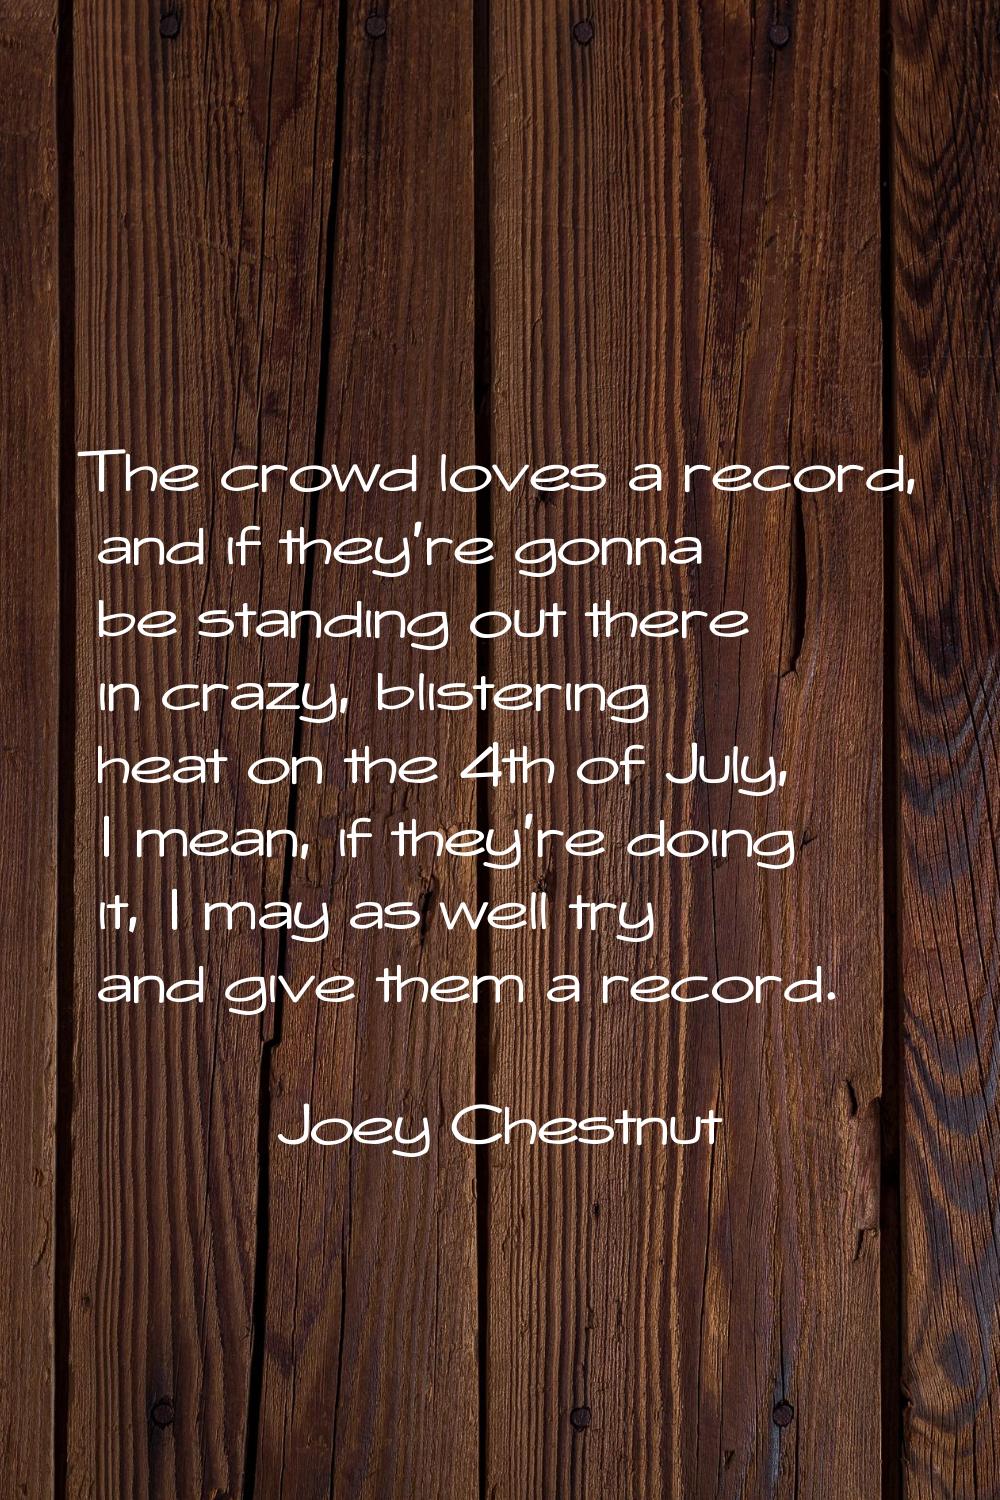 The crowd loves a record, and if they're gonna be standing out there in crazy, blistering heat on t